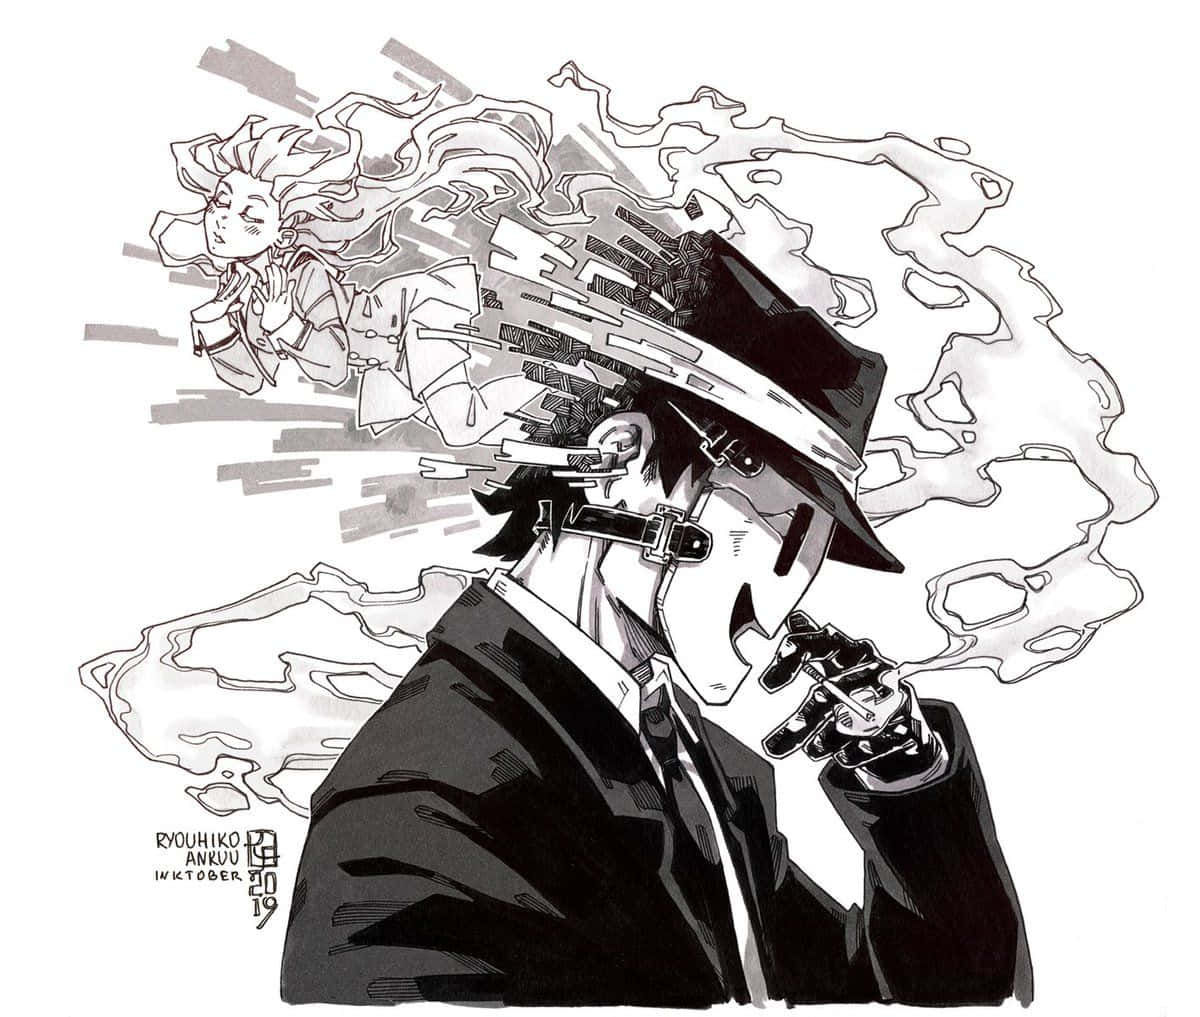 A Man In A Suit And Hat Is Smoking